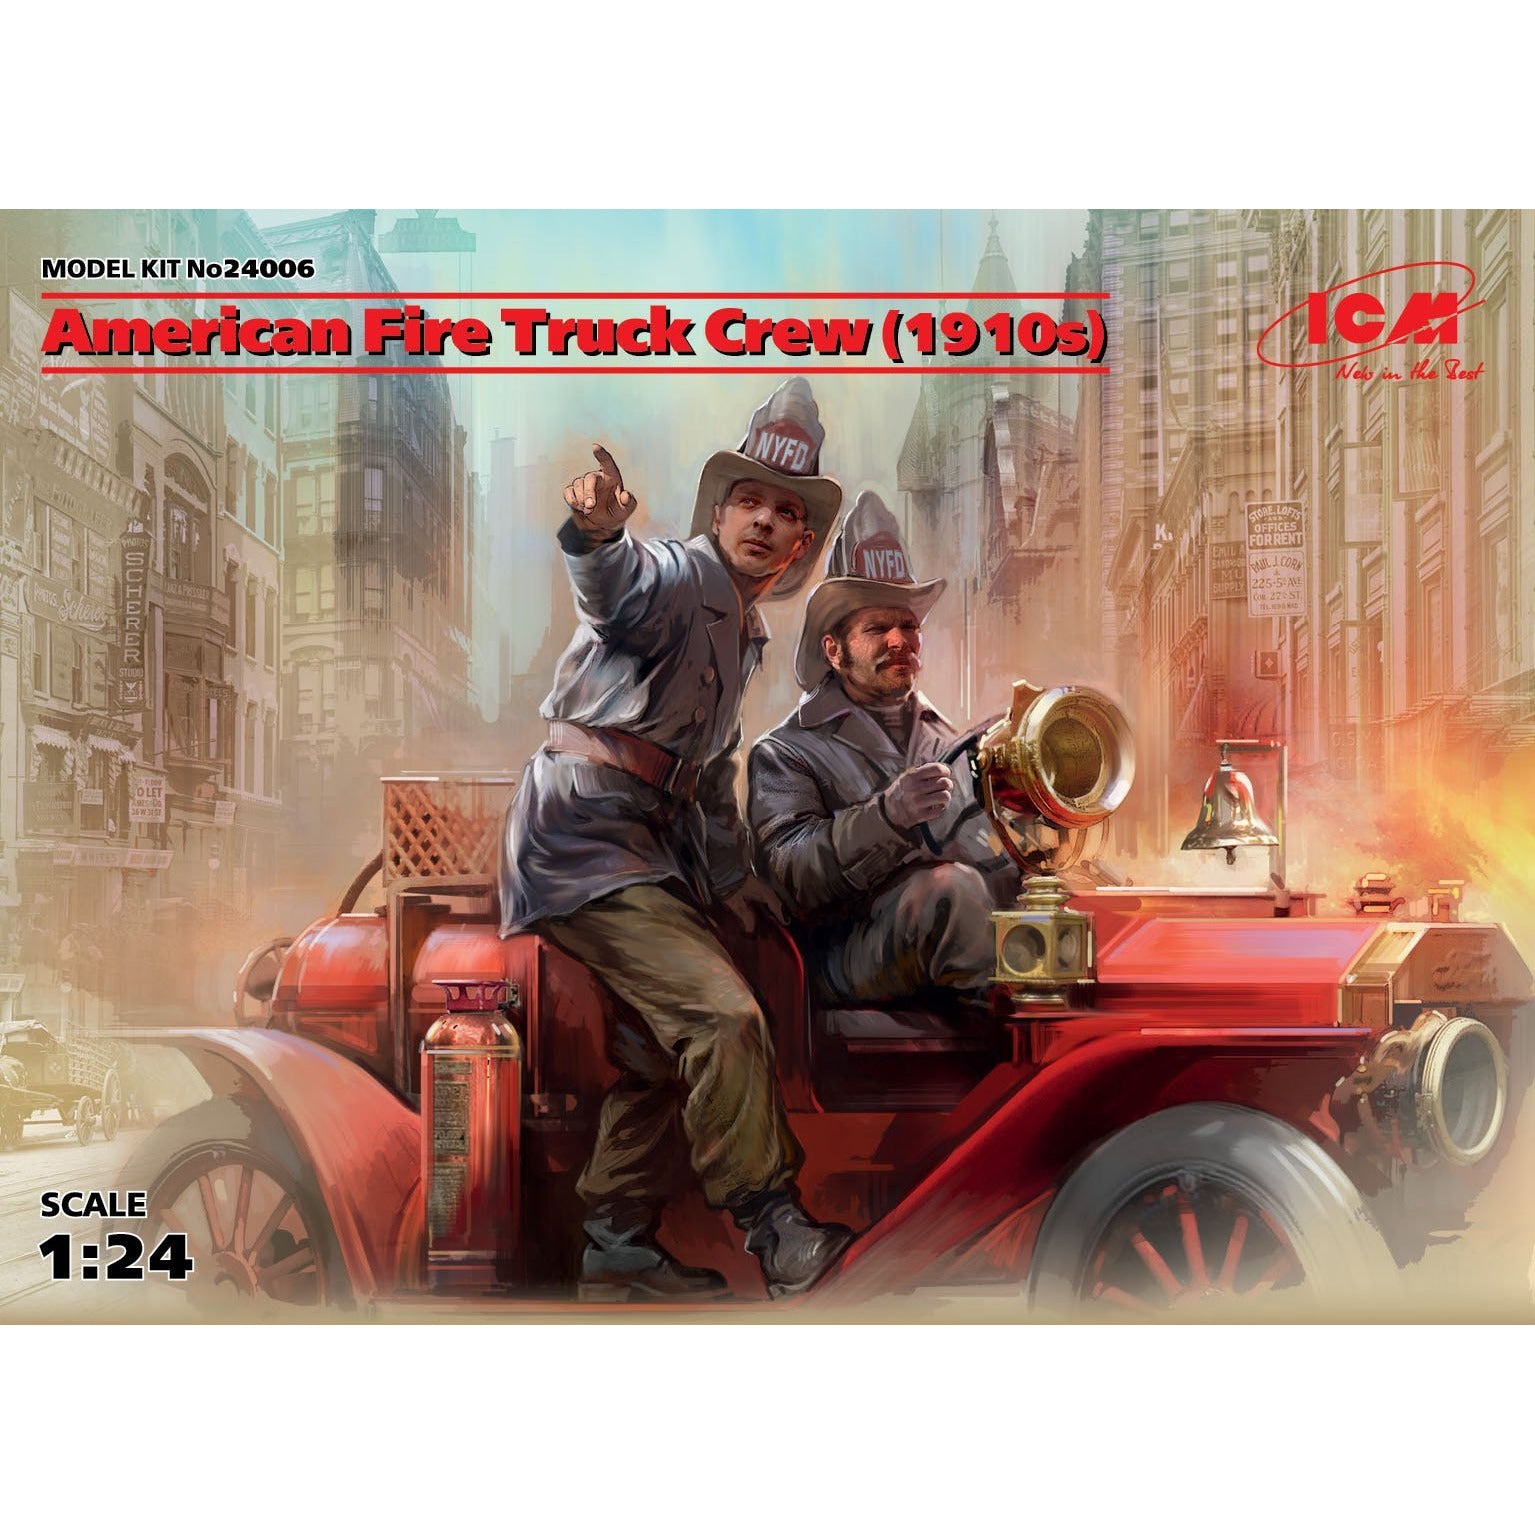 American Fire Truck Crew (1910s) 1/24 by ICM